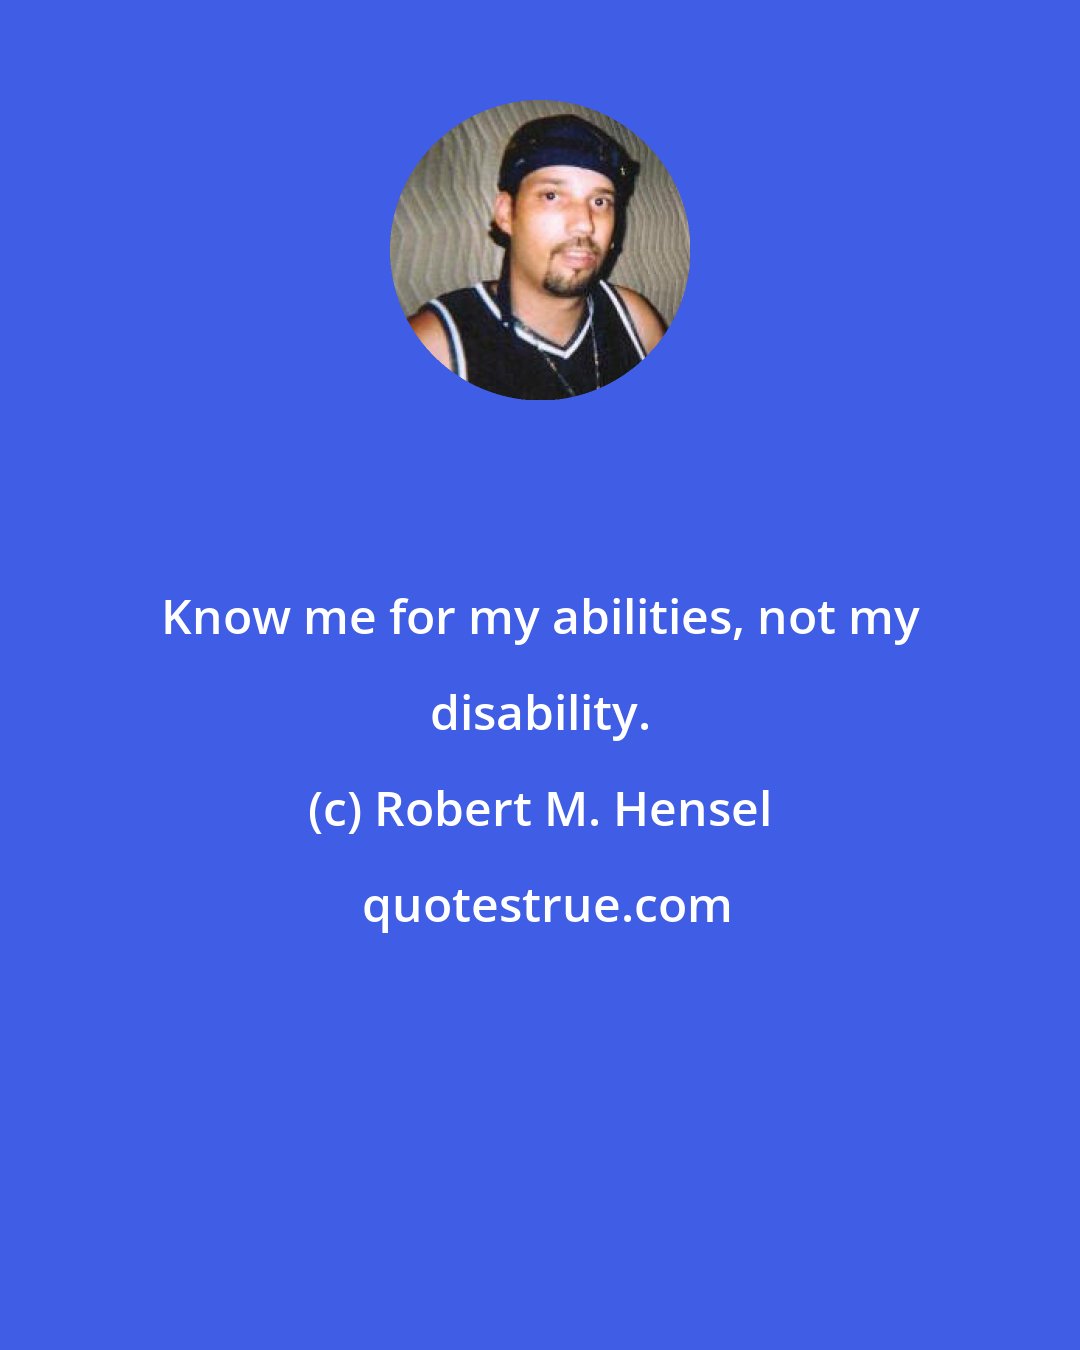 Robert M. Hensel: Know me for my abilities, not my disability.